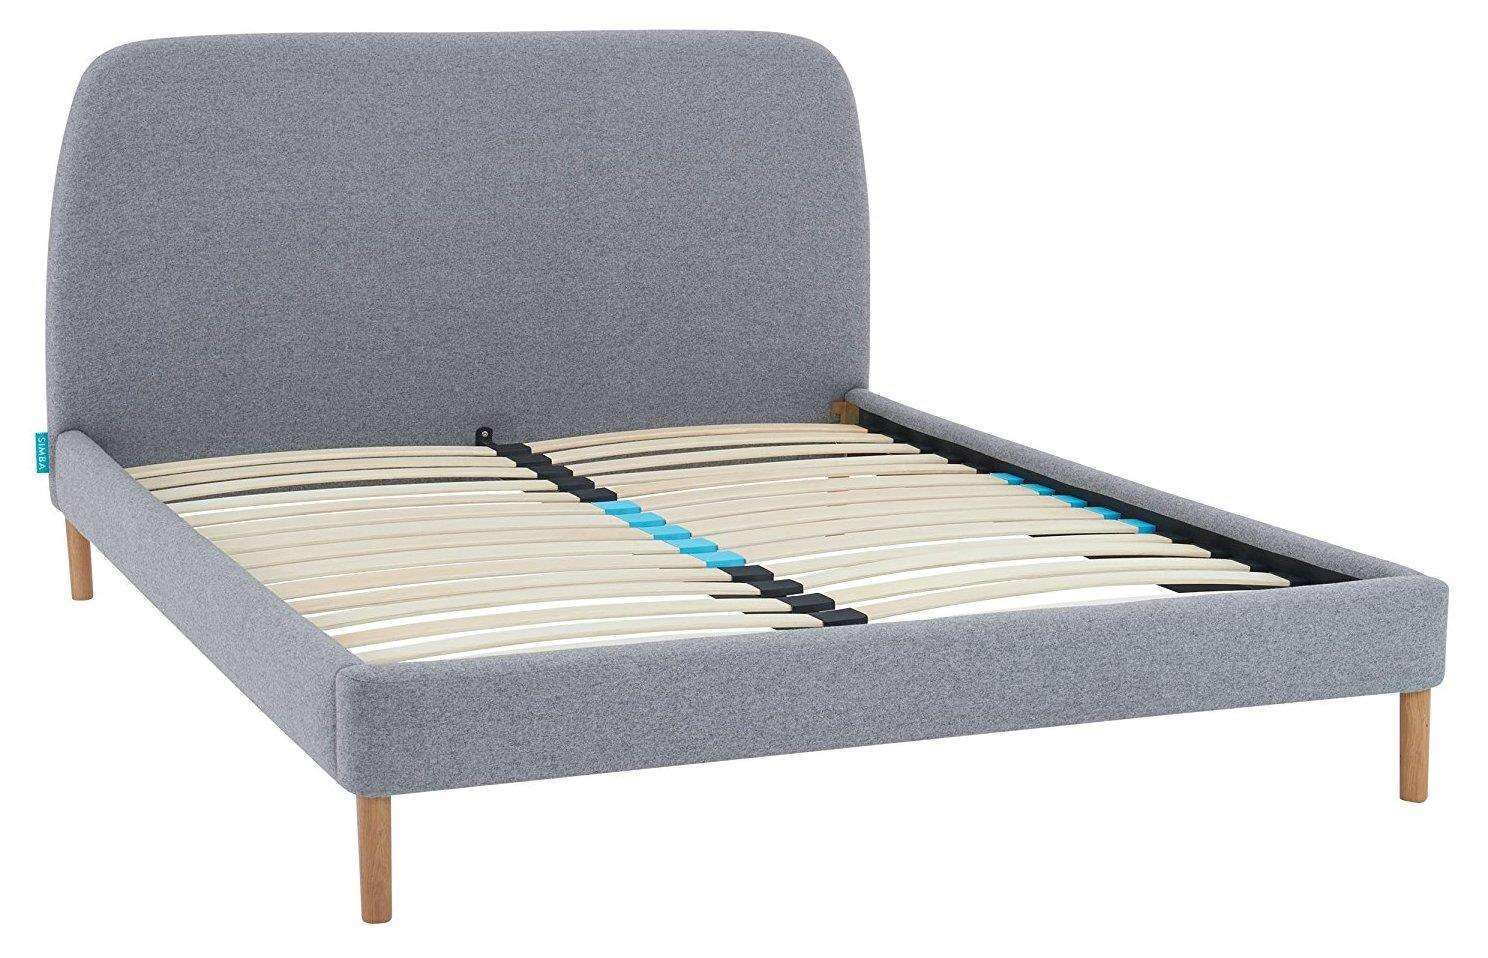 An upholstered Super King bed frame and headboard is on offer at £235.90, cut down from £675.00.